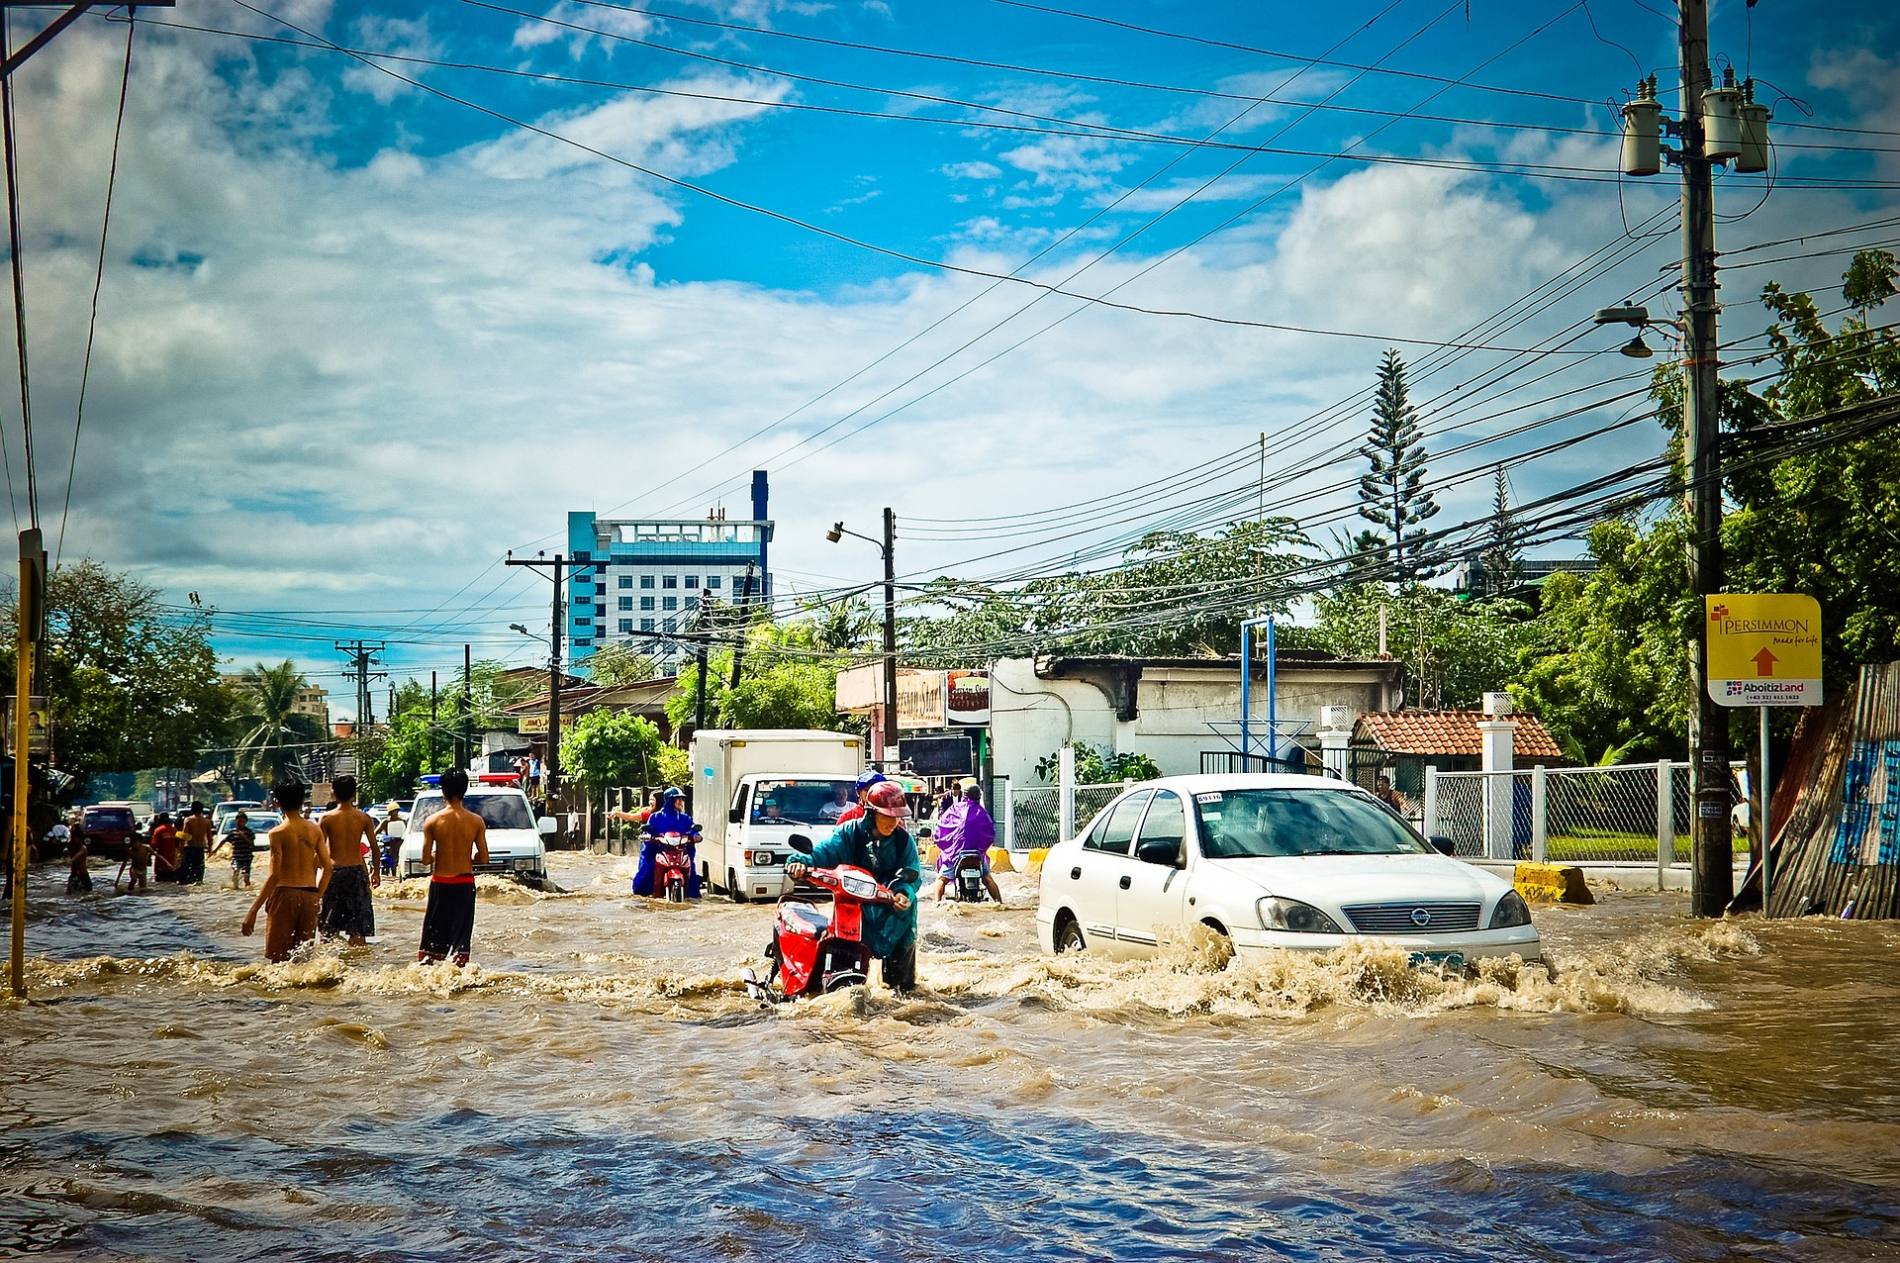 People and cars in a flooded street.